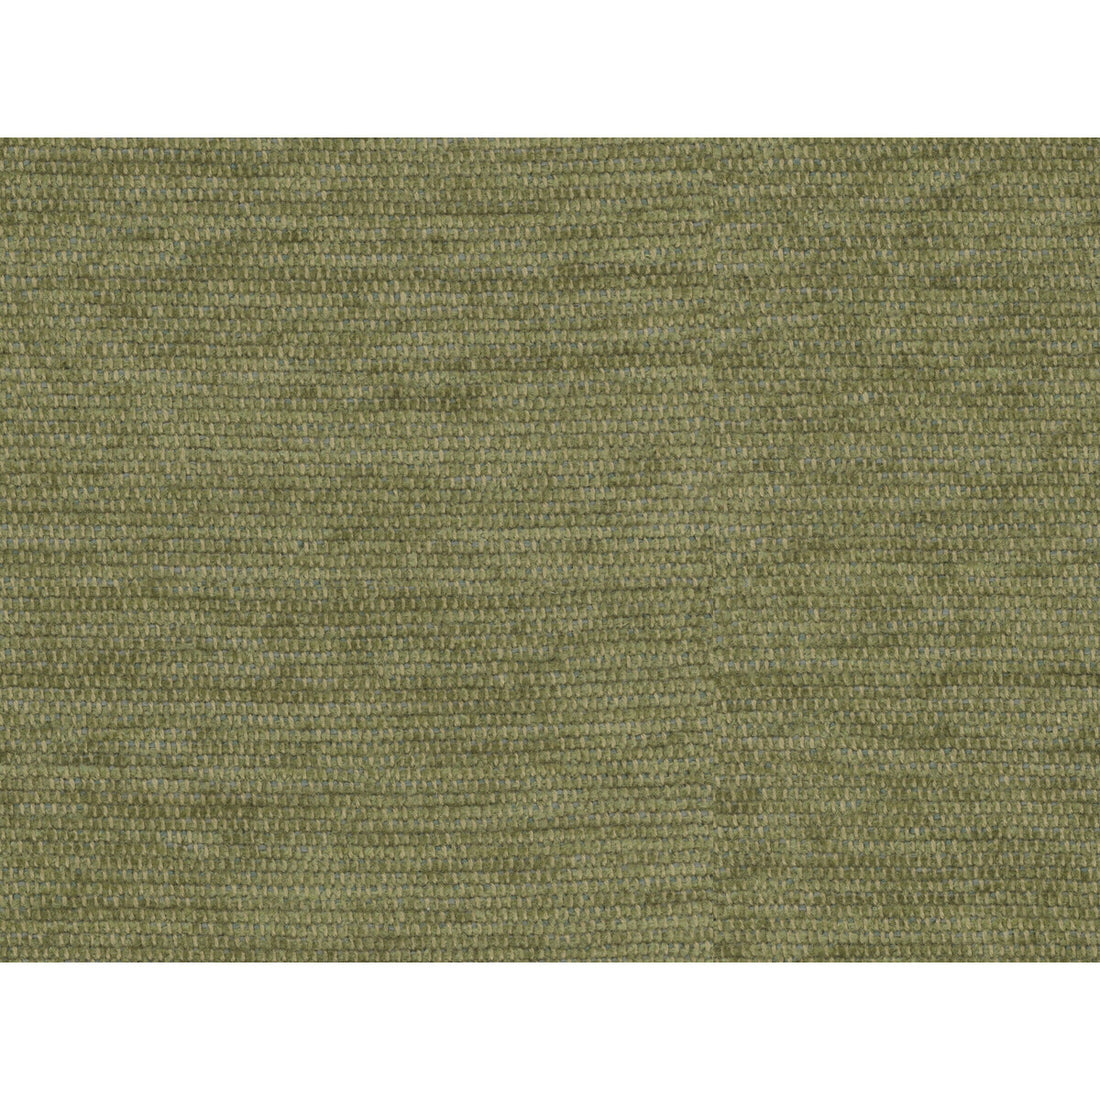 Revard Chenille fabric in avocado color - pattern 8016107.3.0 - by Brunschwig &amp; Fils in the Chambery Textures collection